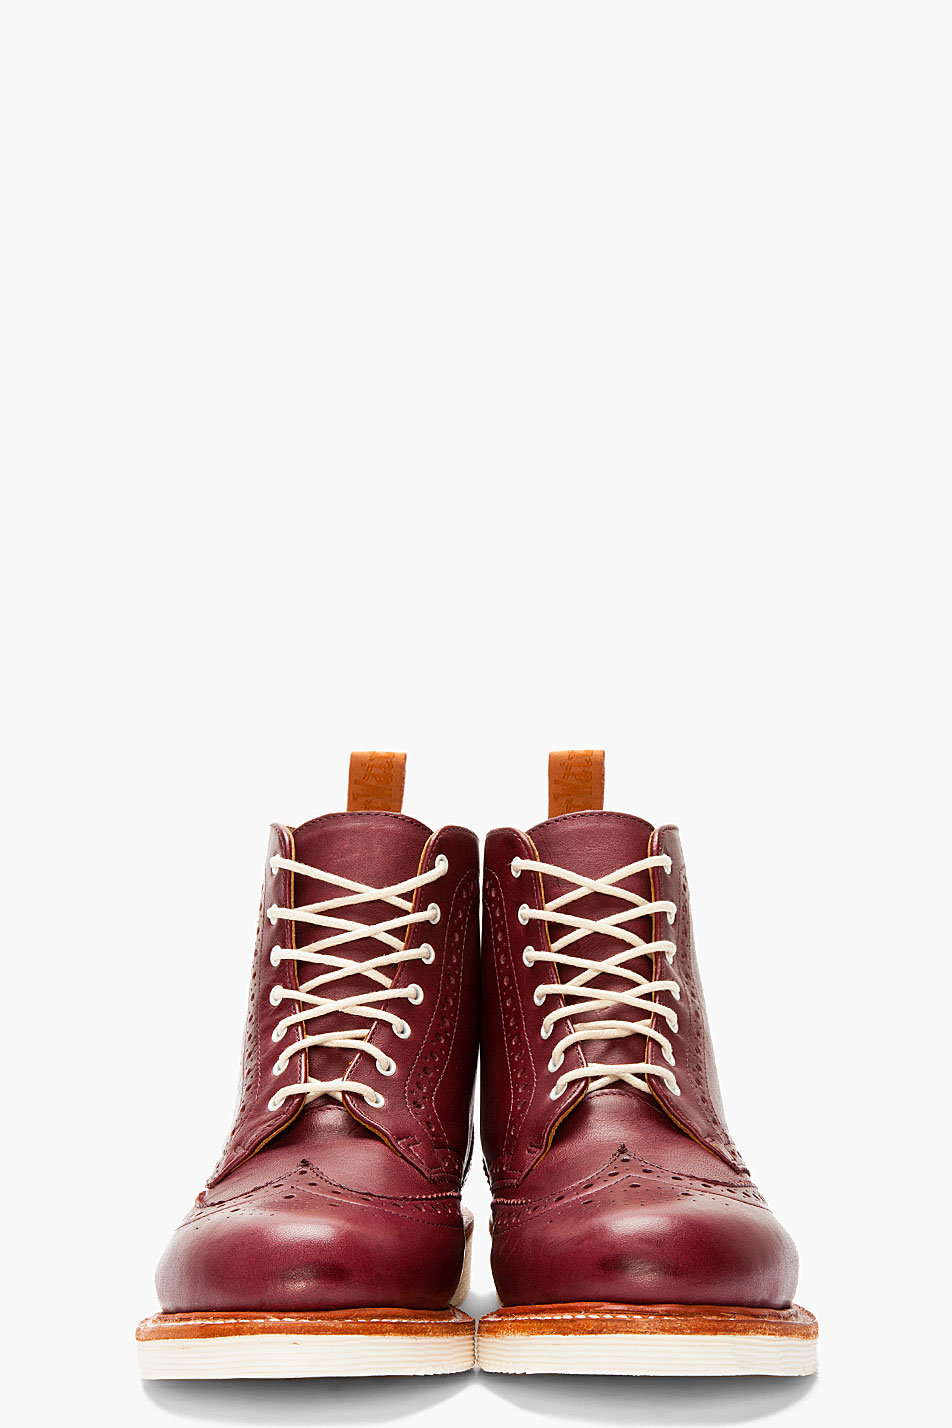 Dr. Martens Burgundy Leather Bentley Wingtip Brogue Boots in Red | Lyst